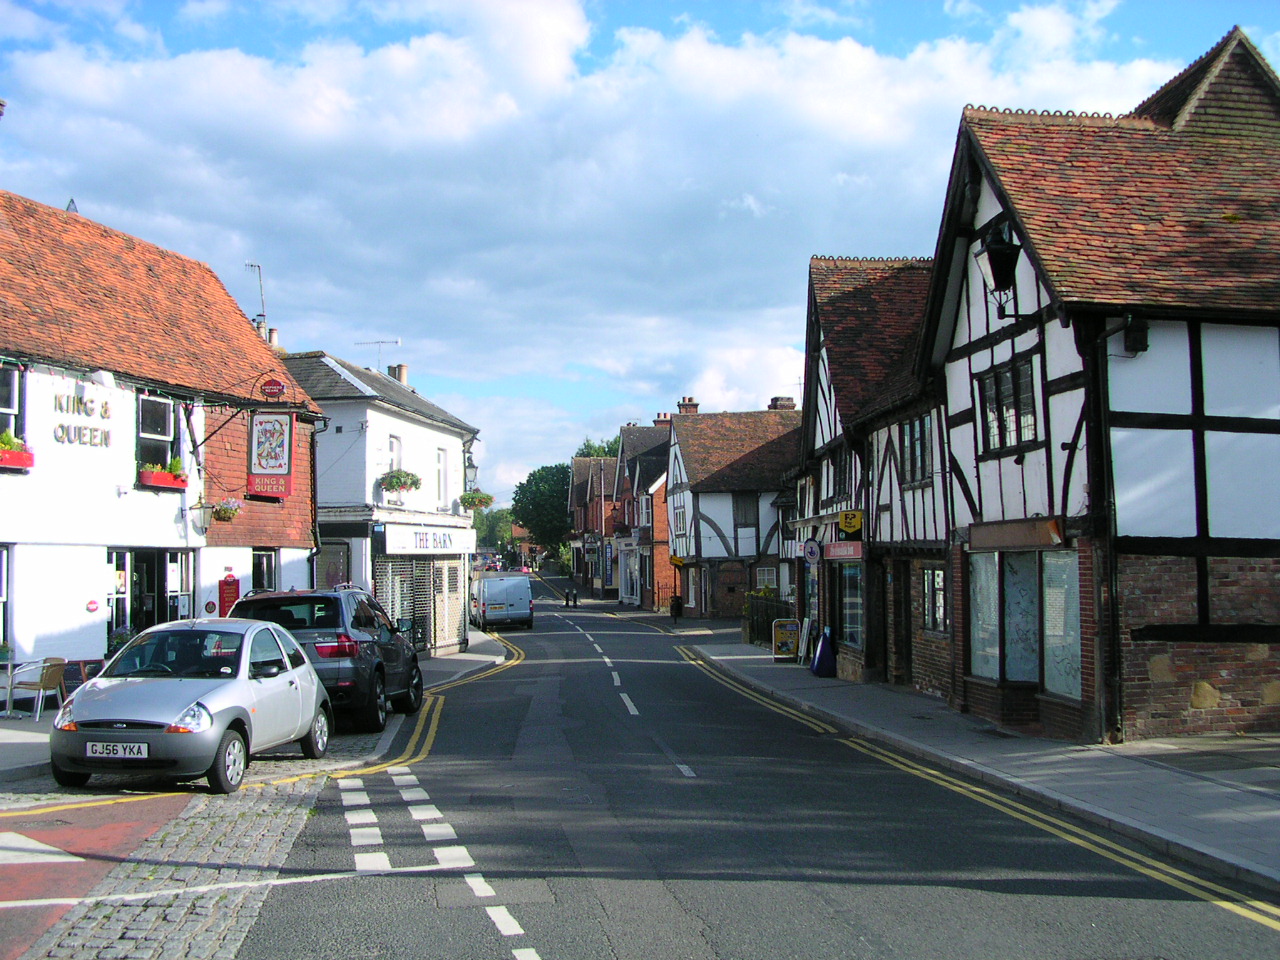 Edenbridge High Street and some of its quaint old buildings